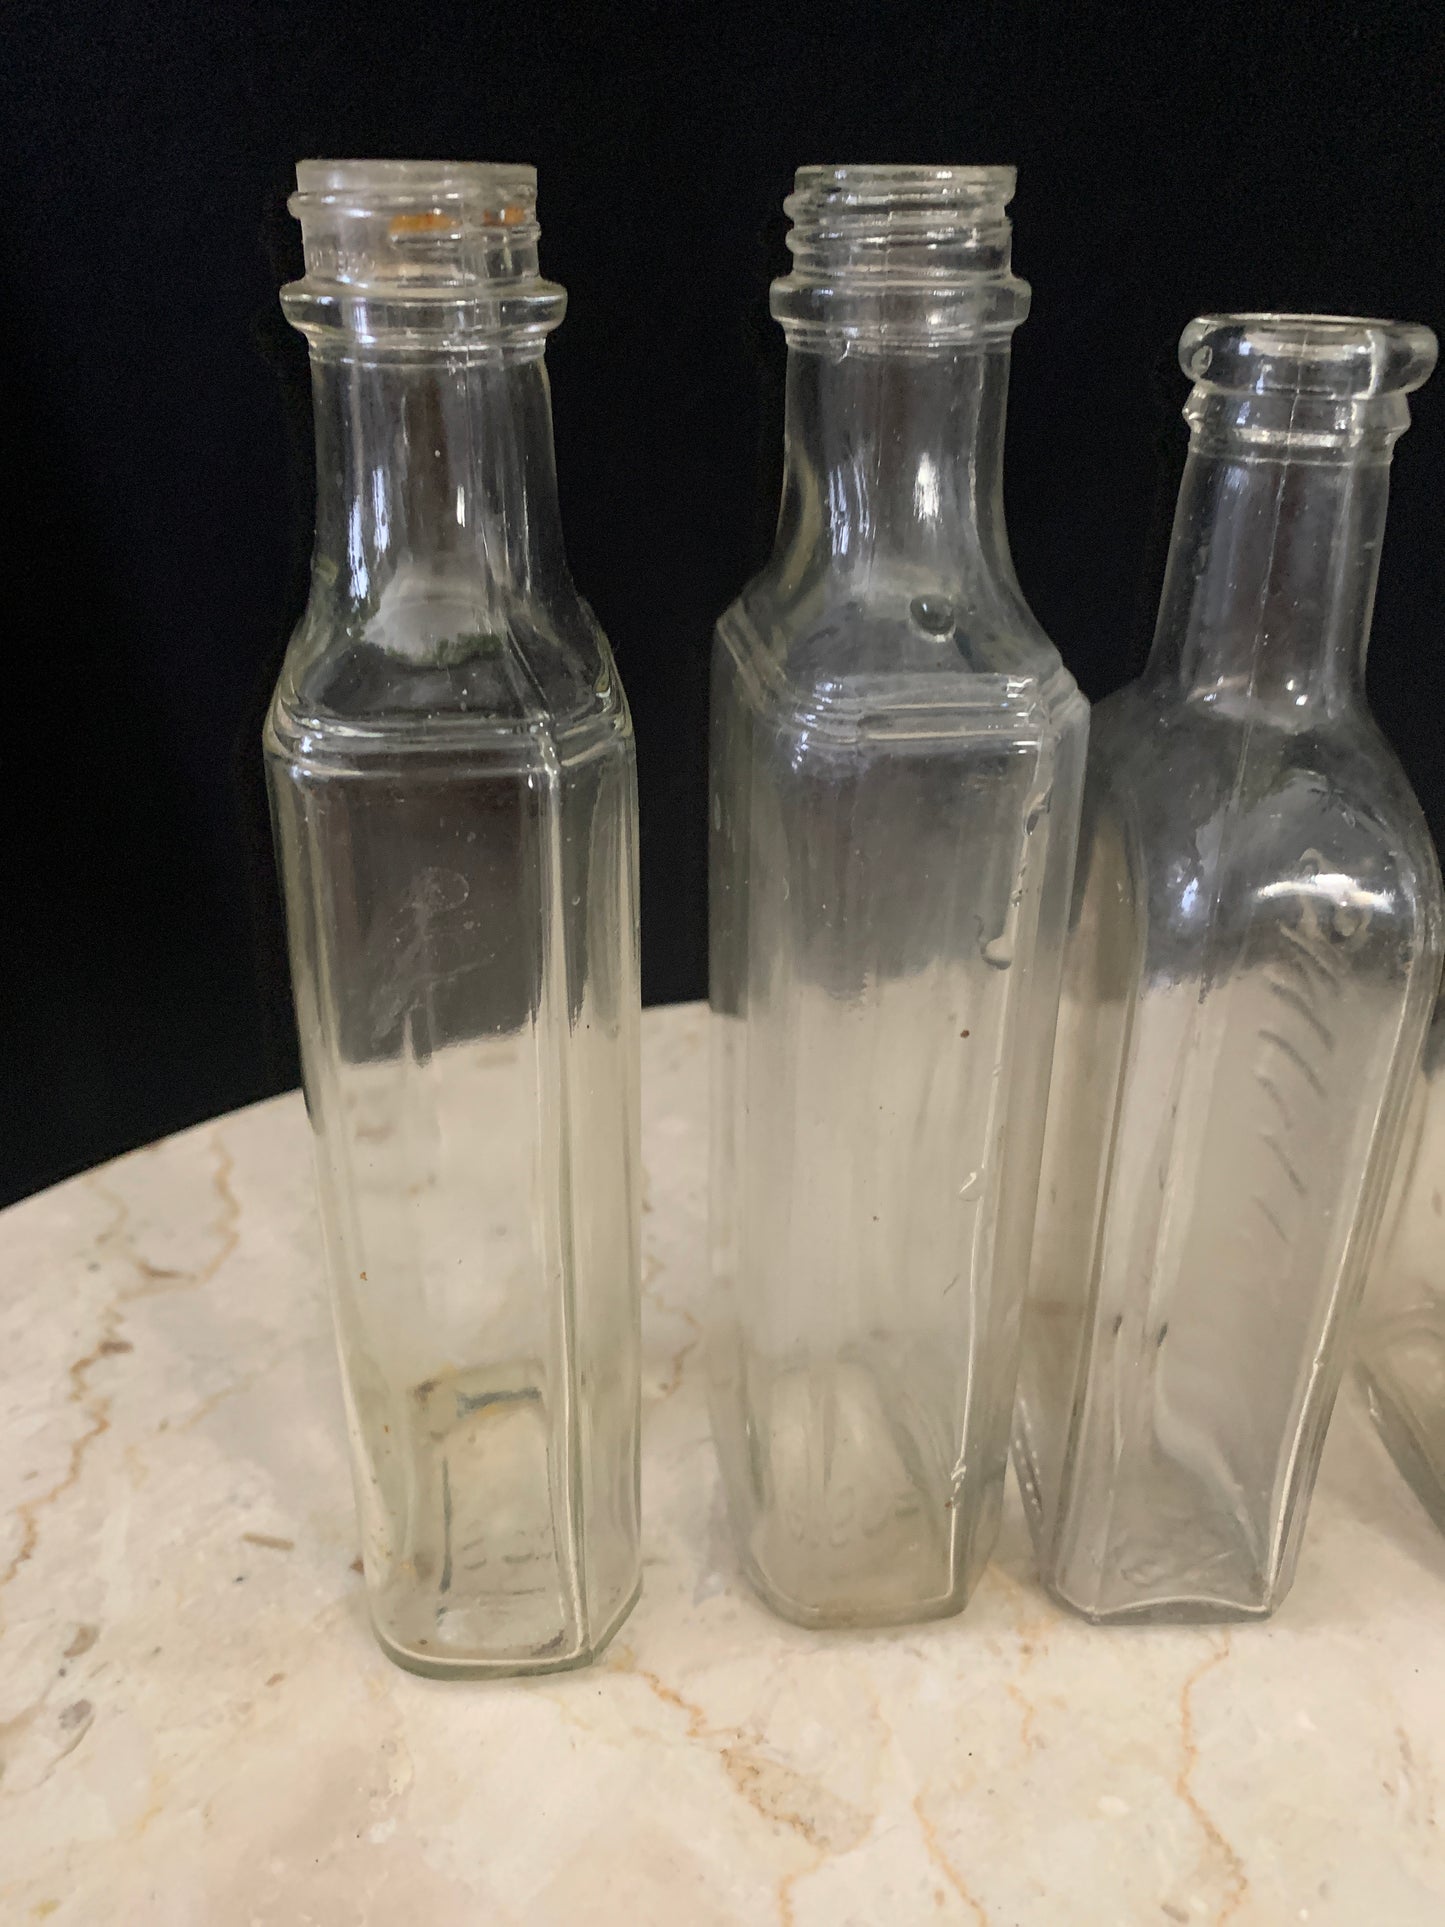 Vintage Apothecary Bottle Instant Collection Group of 4 Antique Bottles